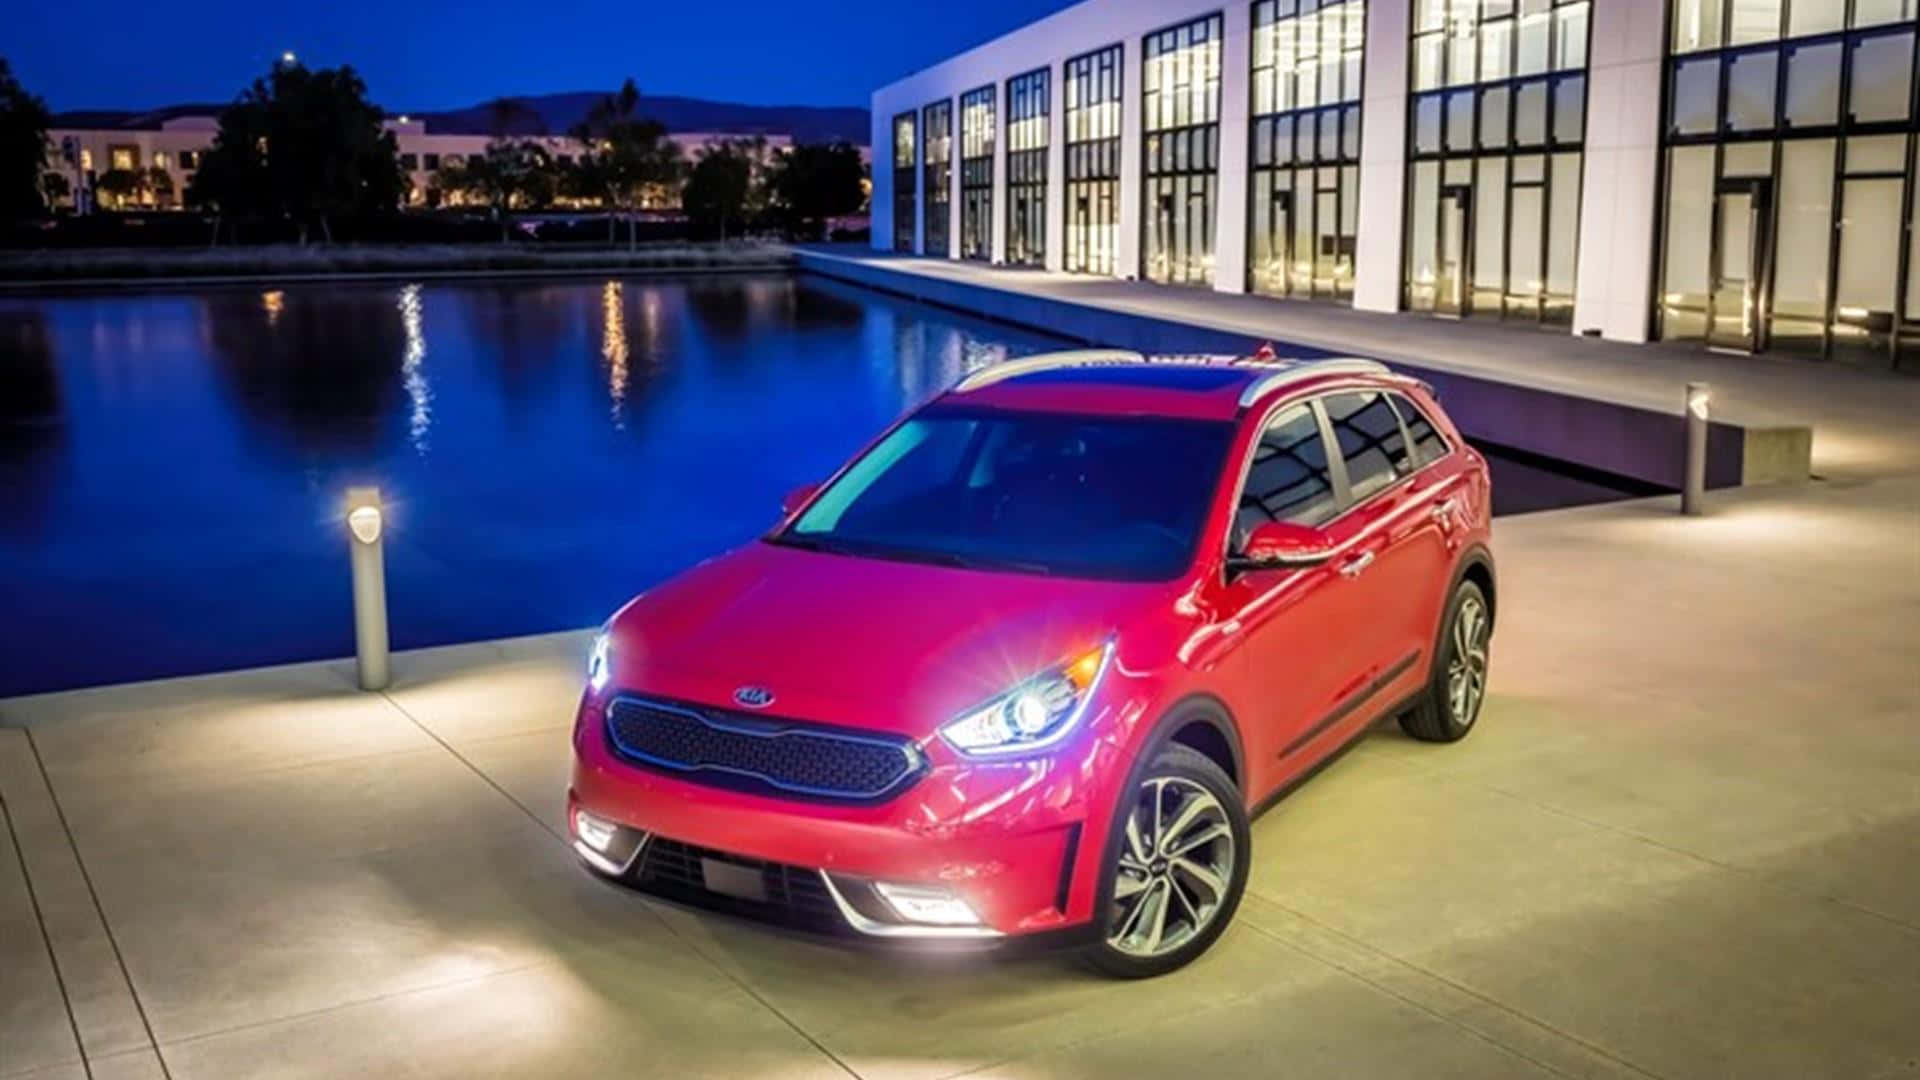 Sleek and Sophisticated Kia Niro in the City Streets Wallpaper